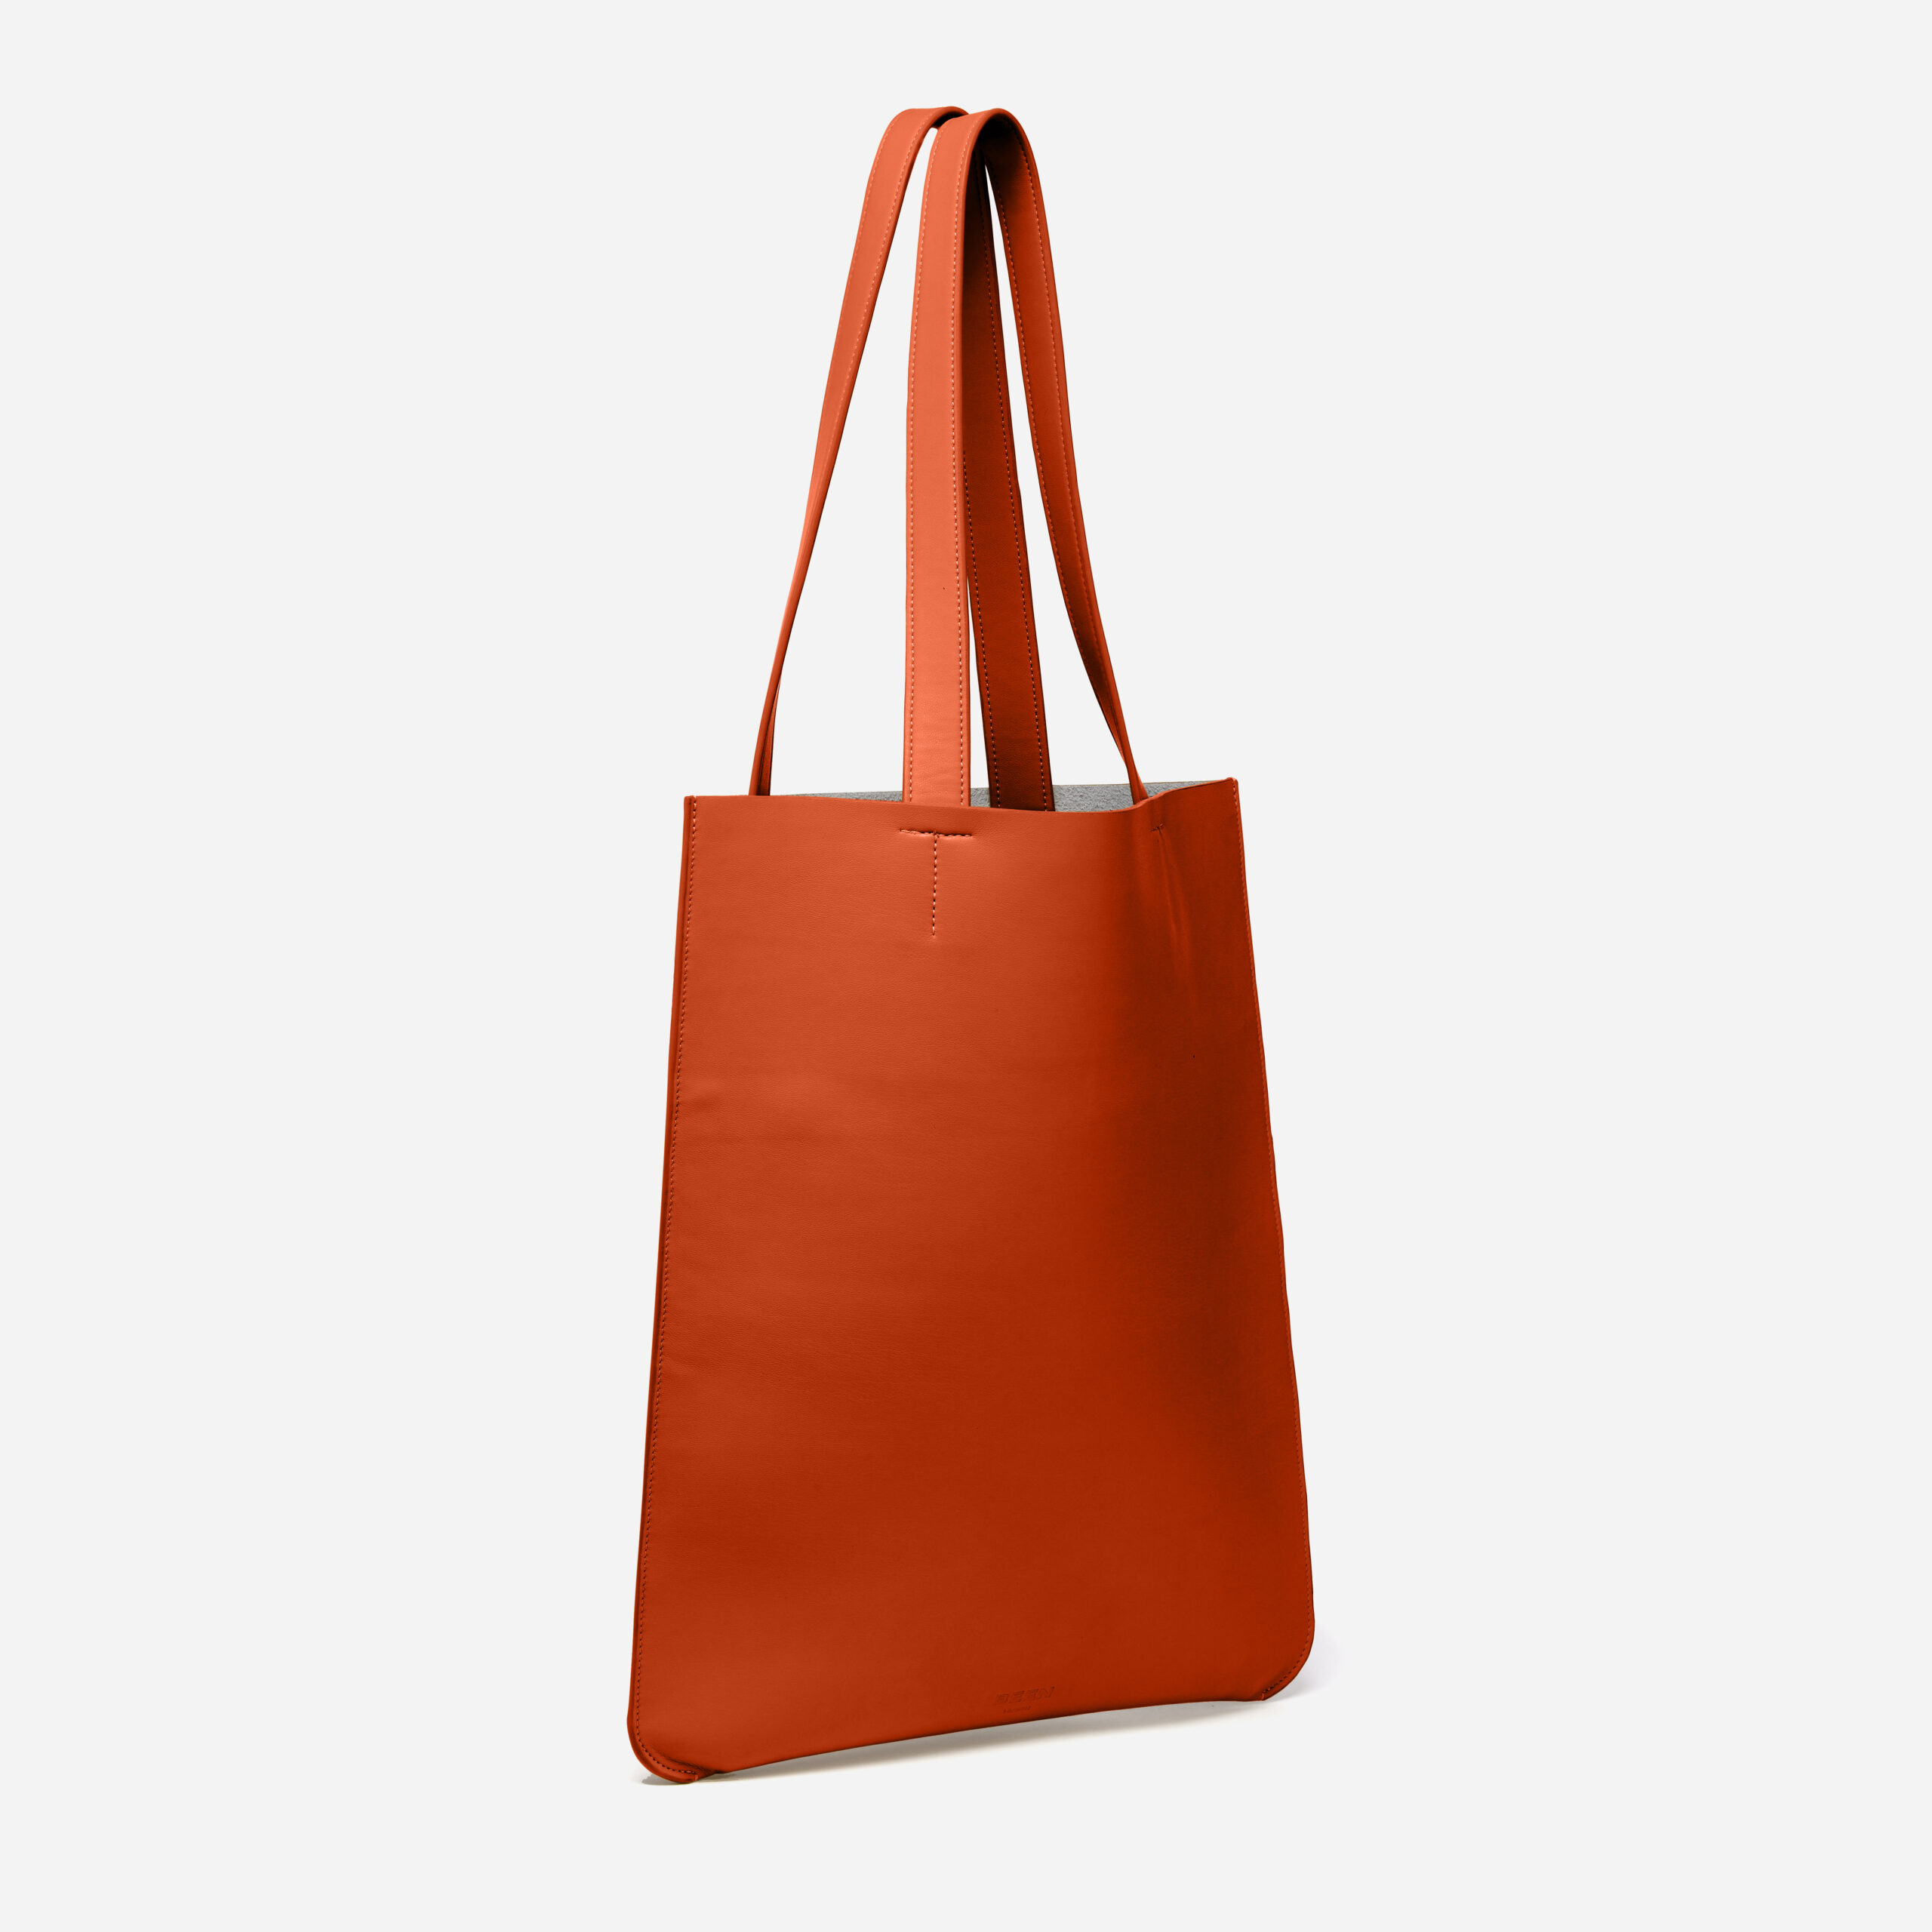 New East Tote | The Forward Lab